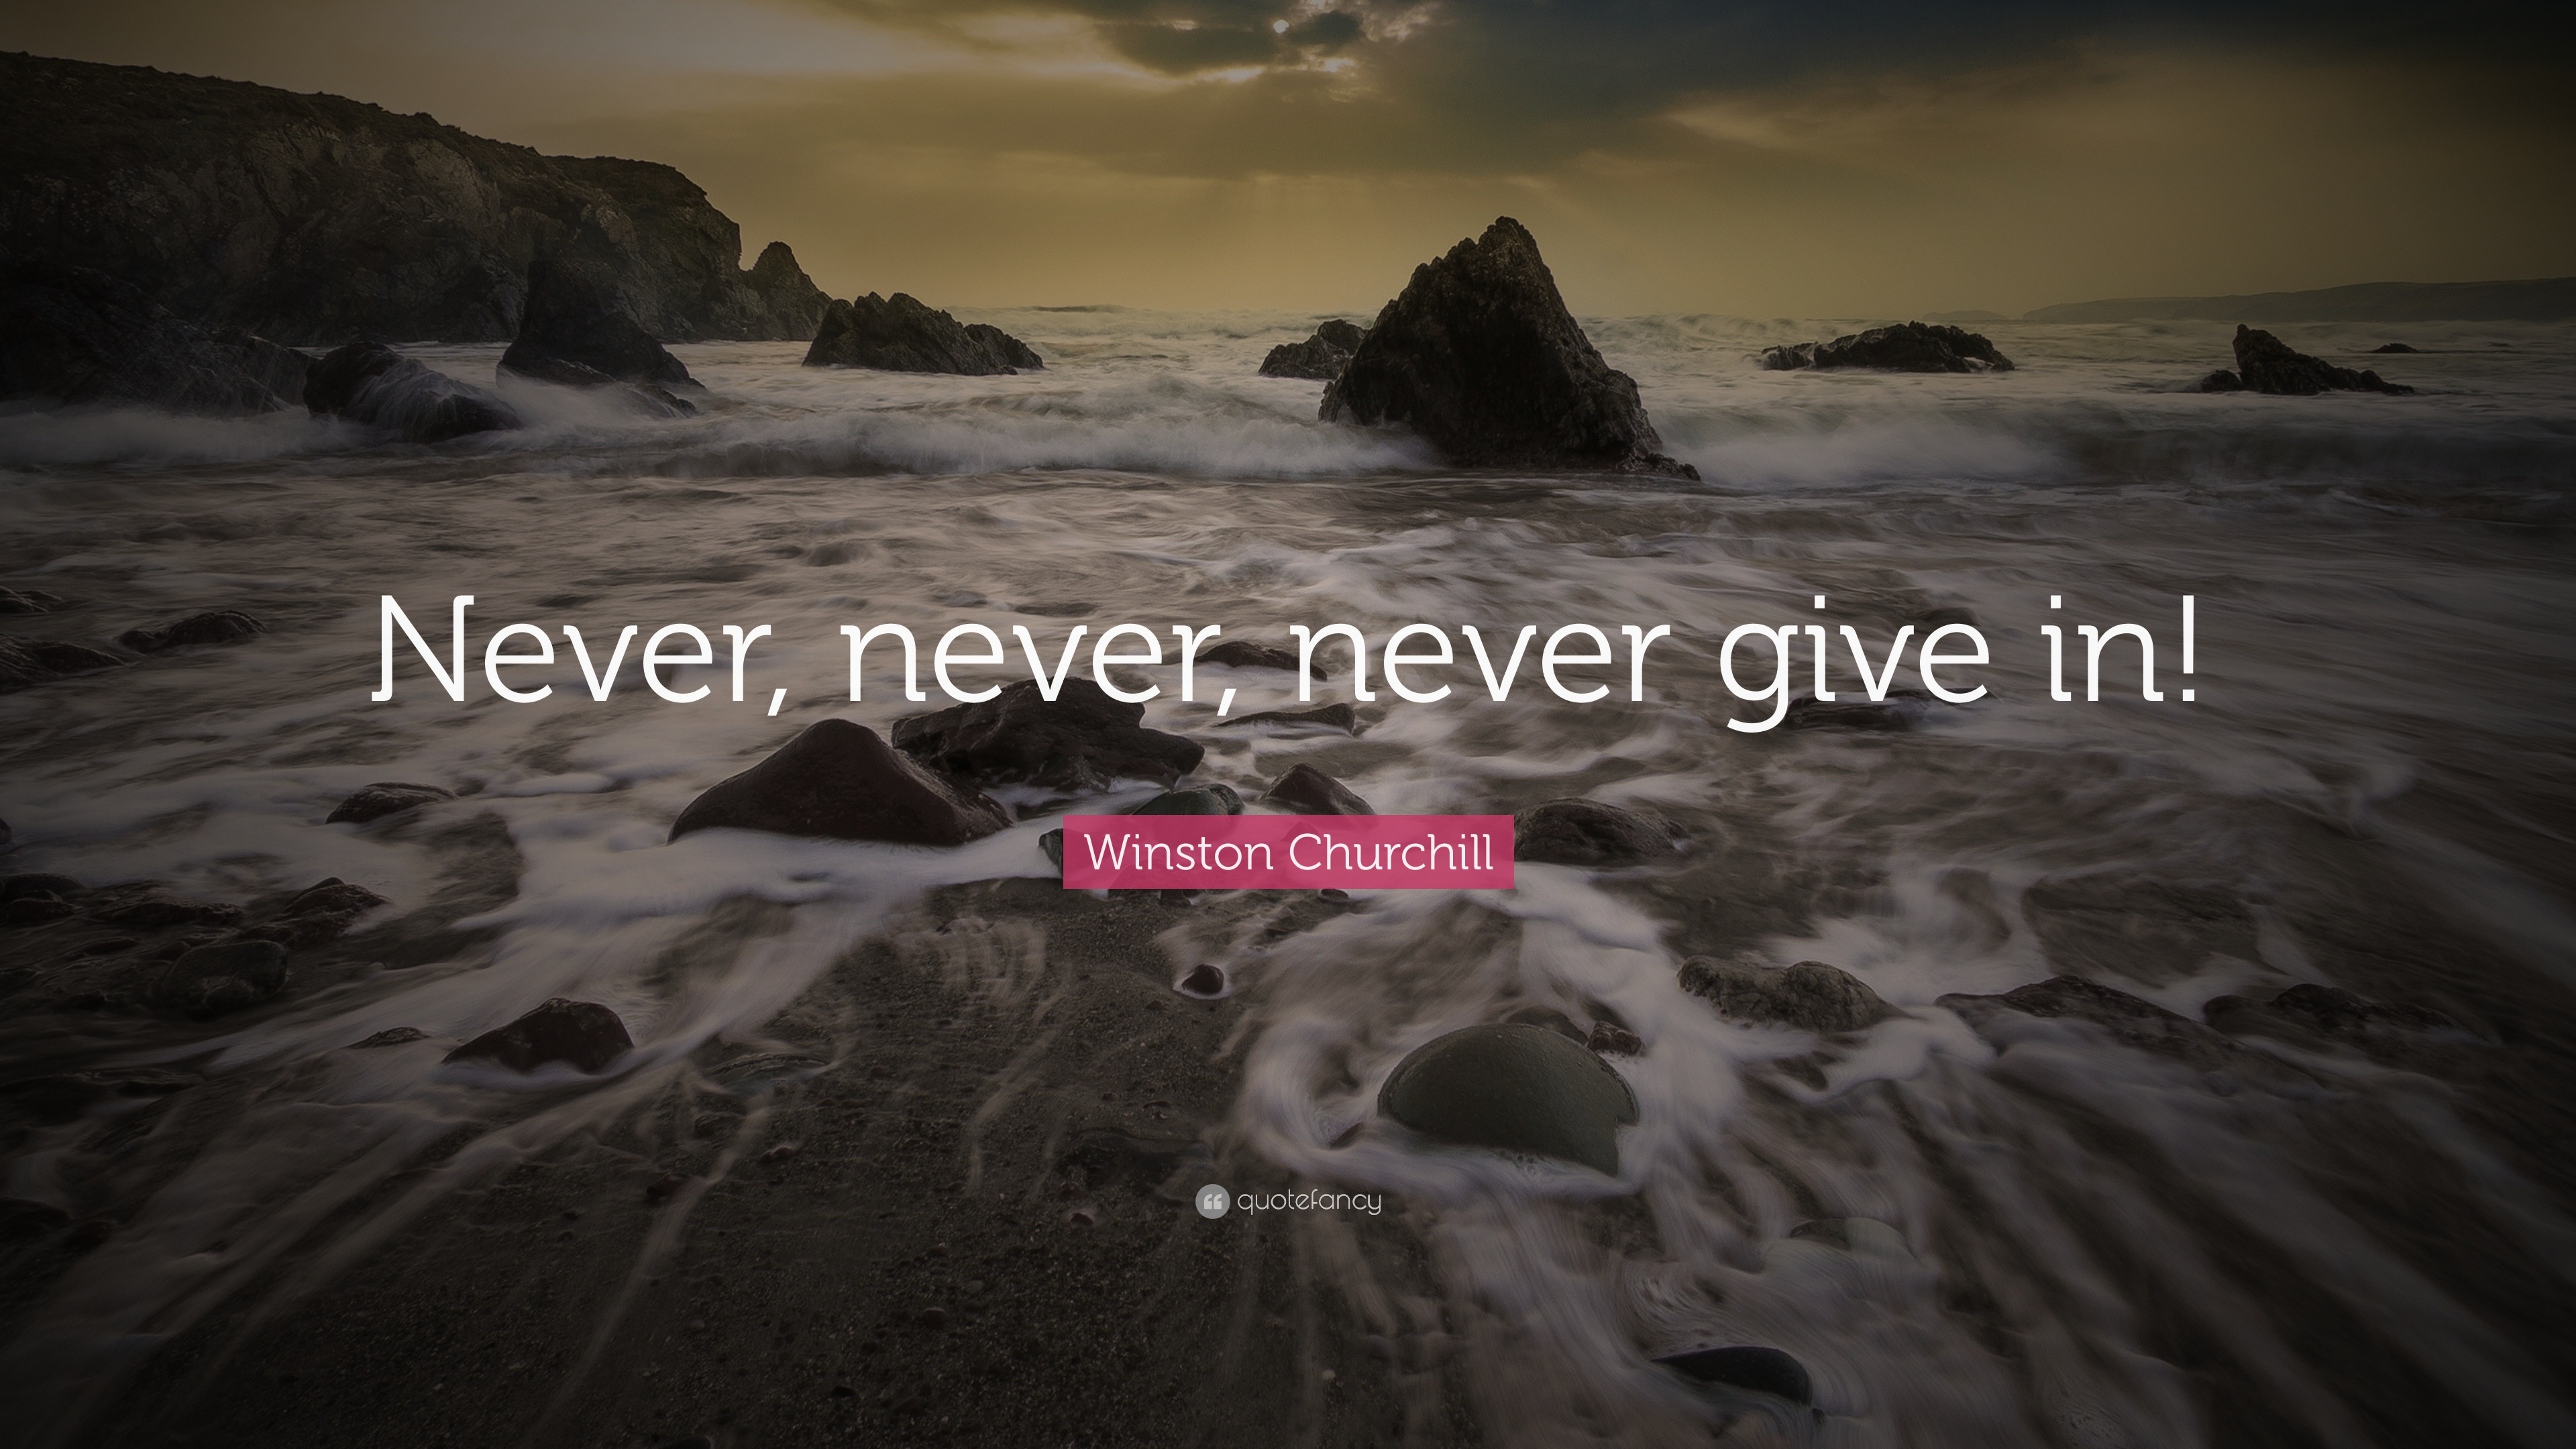 Winston Churchill Quote: “Never, never, never give in!”